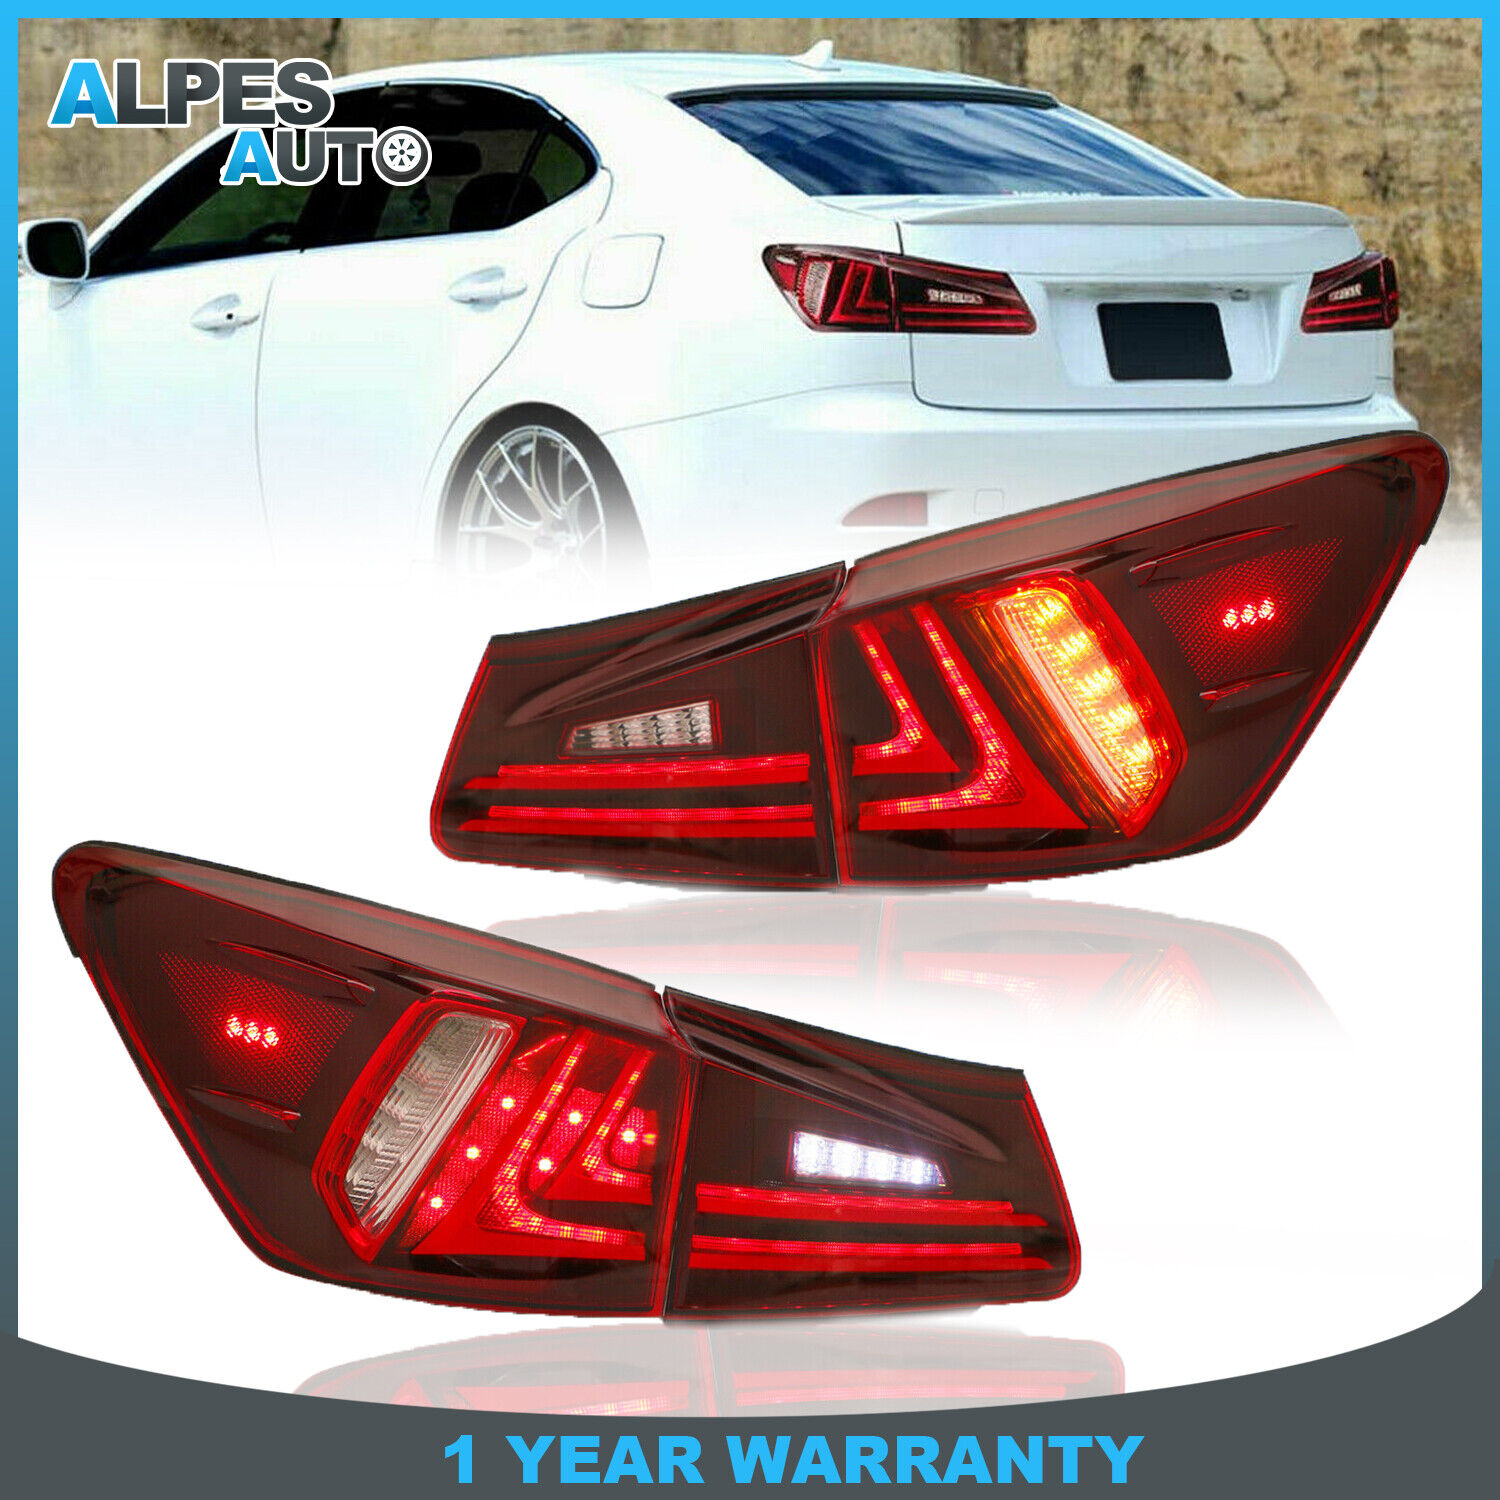 2PCS LED Red Clear Tail Lights Rear Lamps For 2006-2012 Lexus IS350 IS250 New